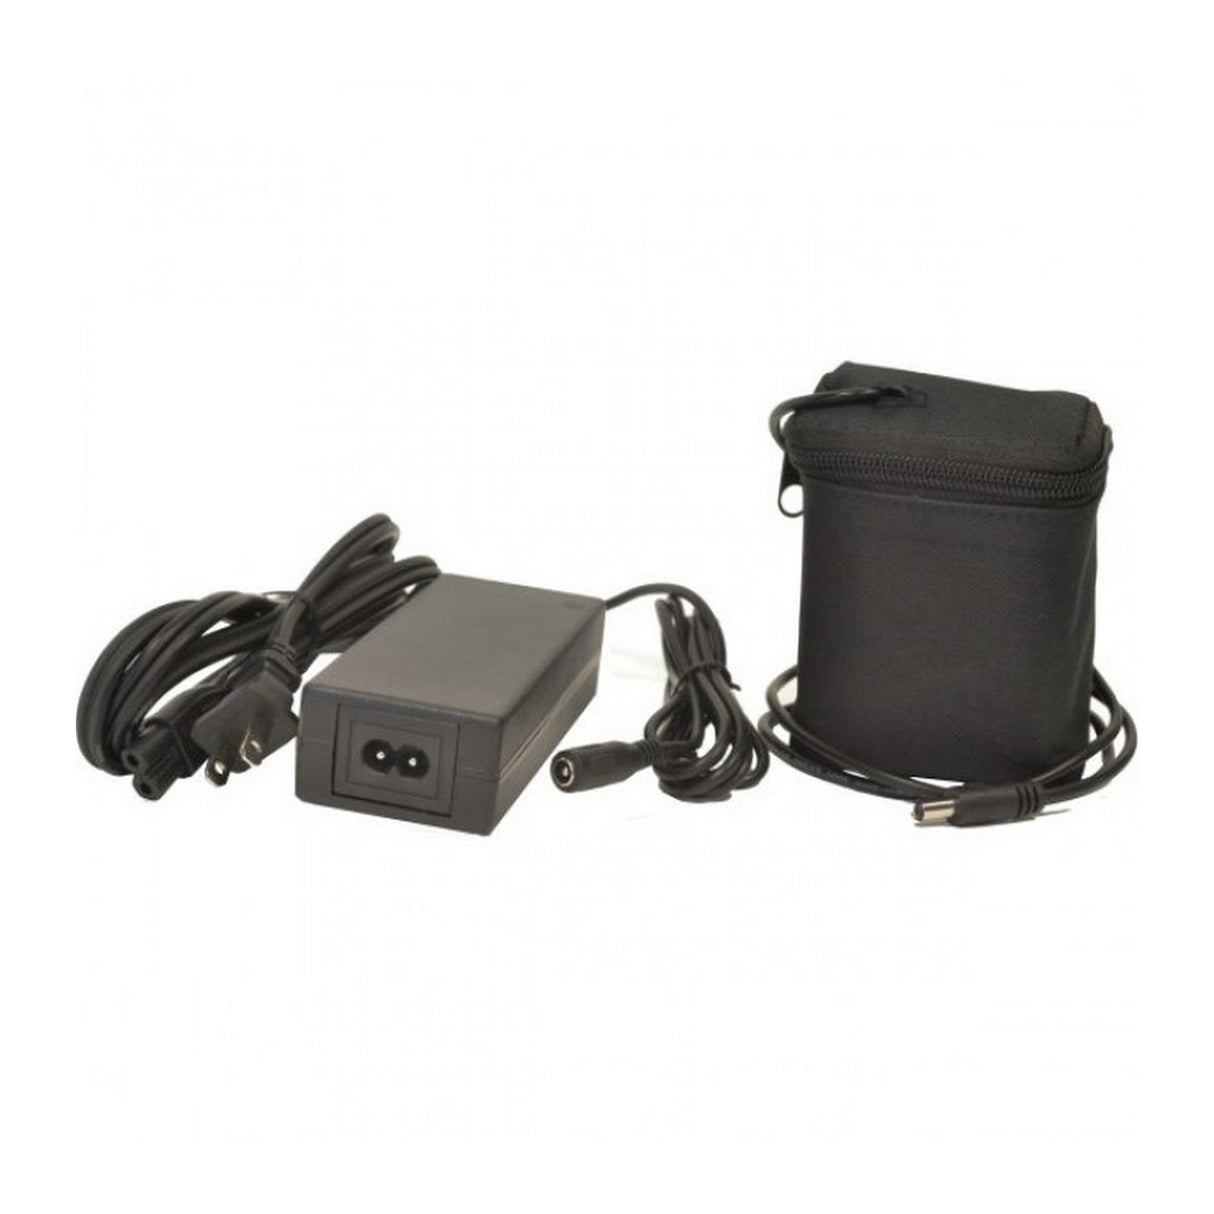 Bescor BMEPIC | Battery and Automatic Charger Kit for Blackmagic Design Cinema Camera